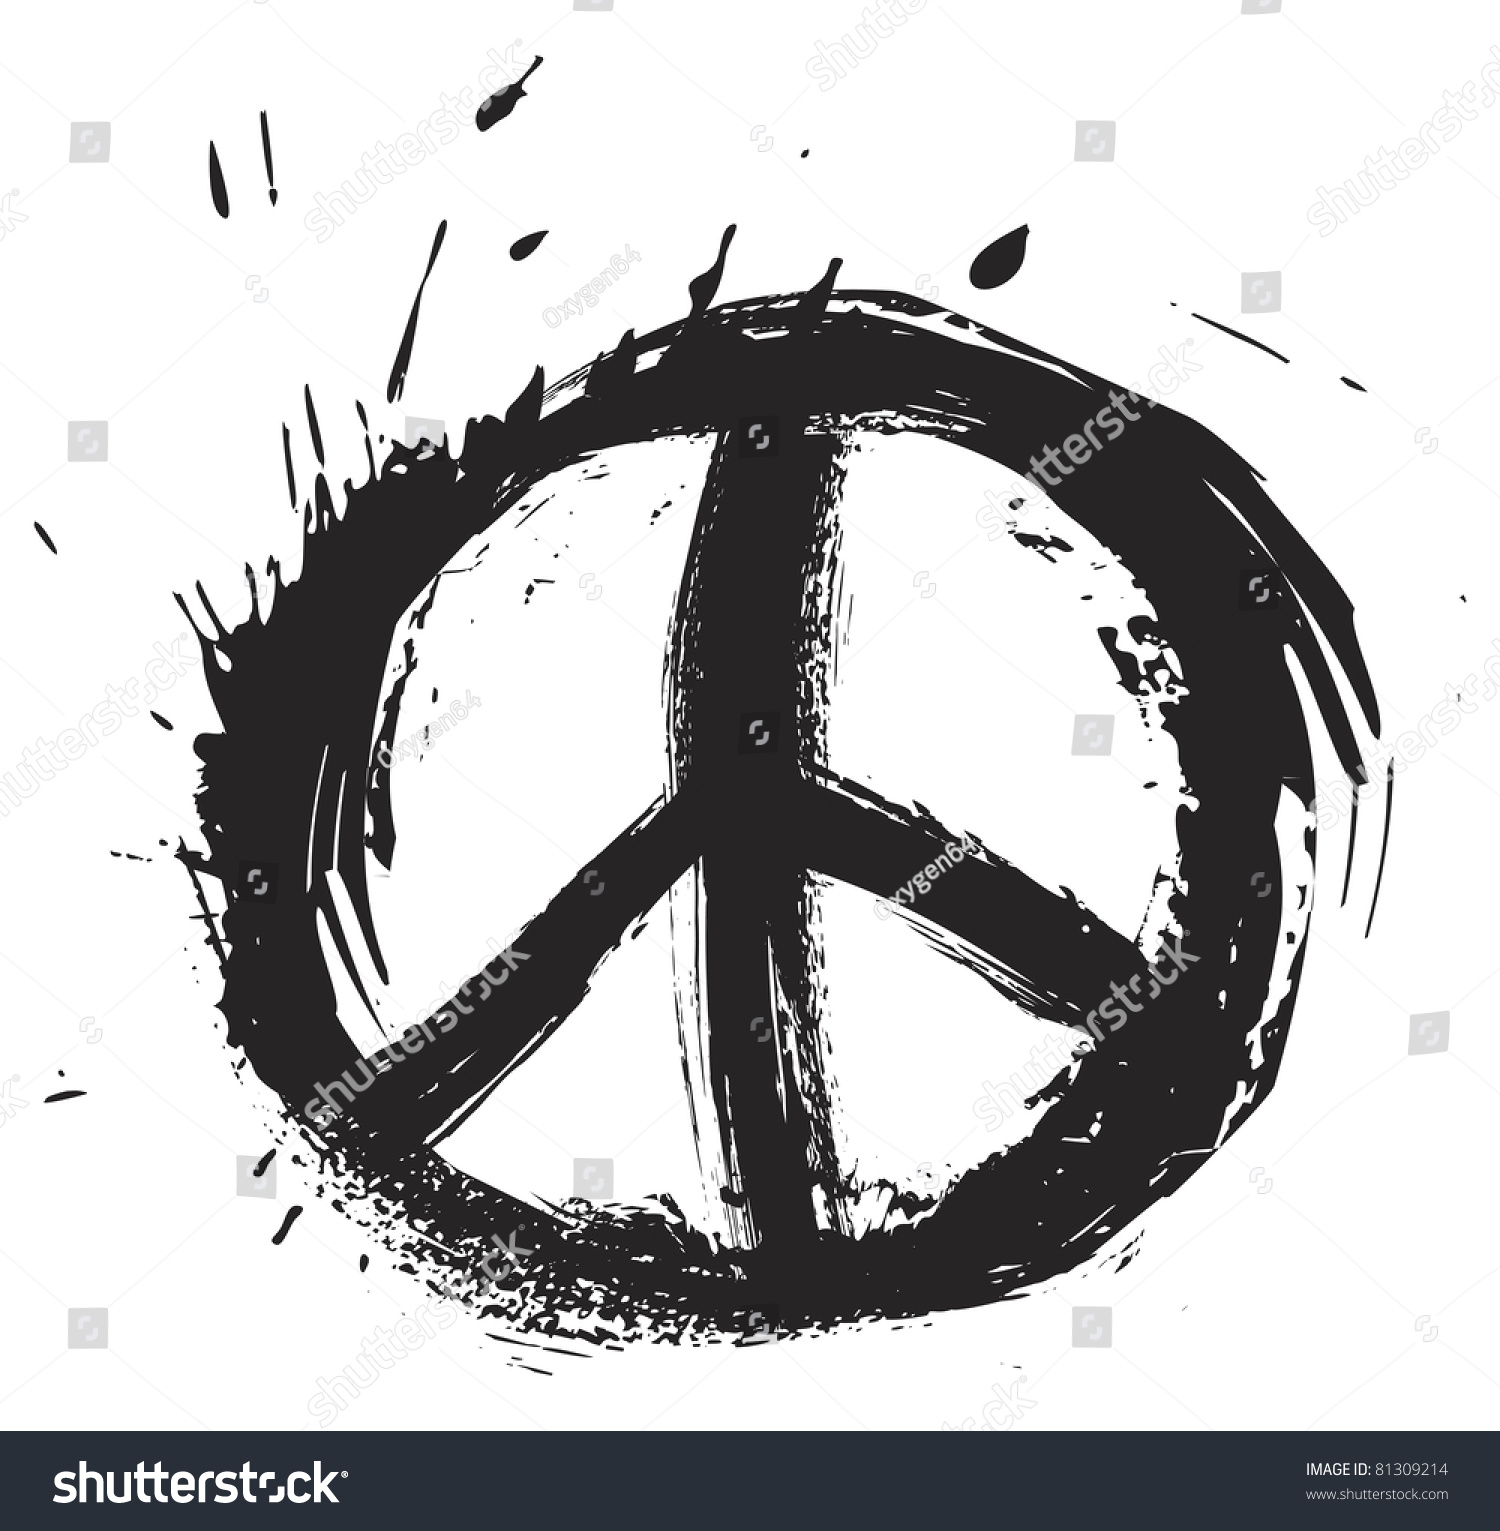 Royalty-free Black peace symbol created in grunge… #81309214 Stock ...